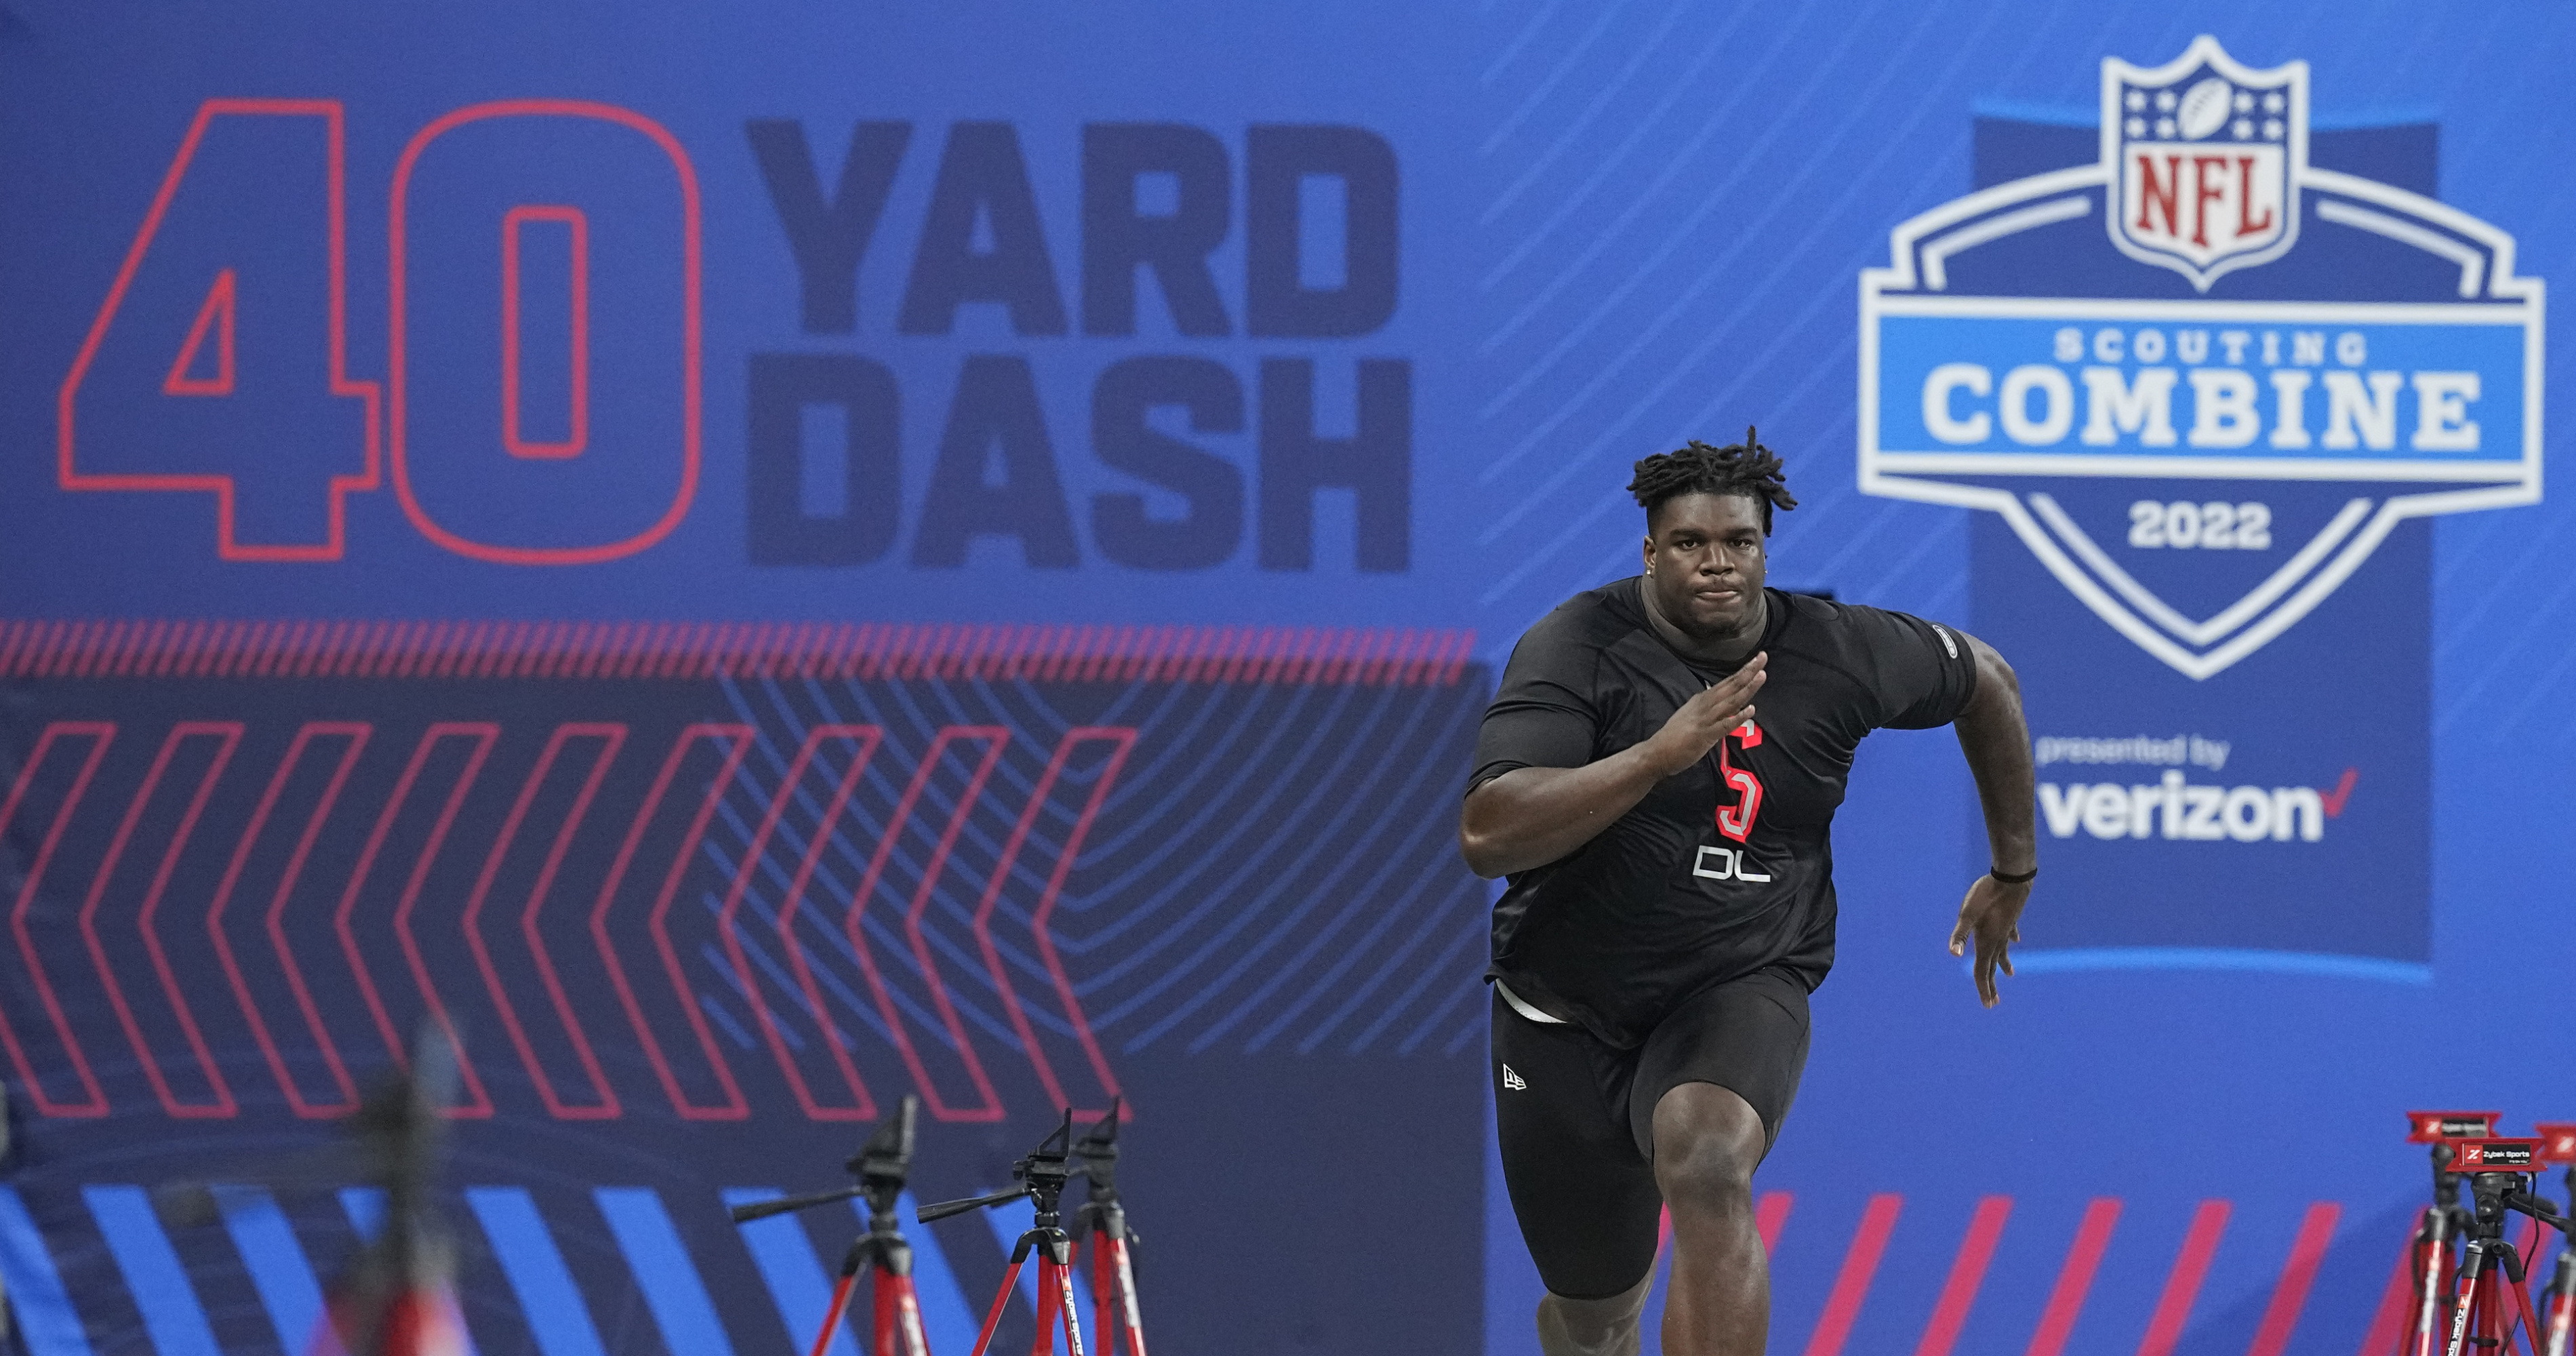 NFL Combine 2022 Results: Highlights, Reaction and Recap from